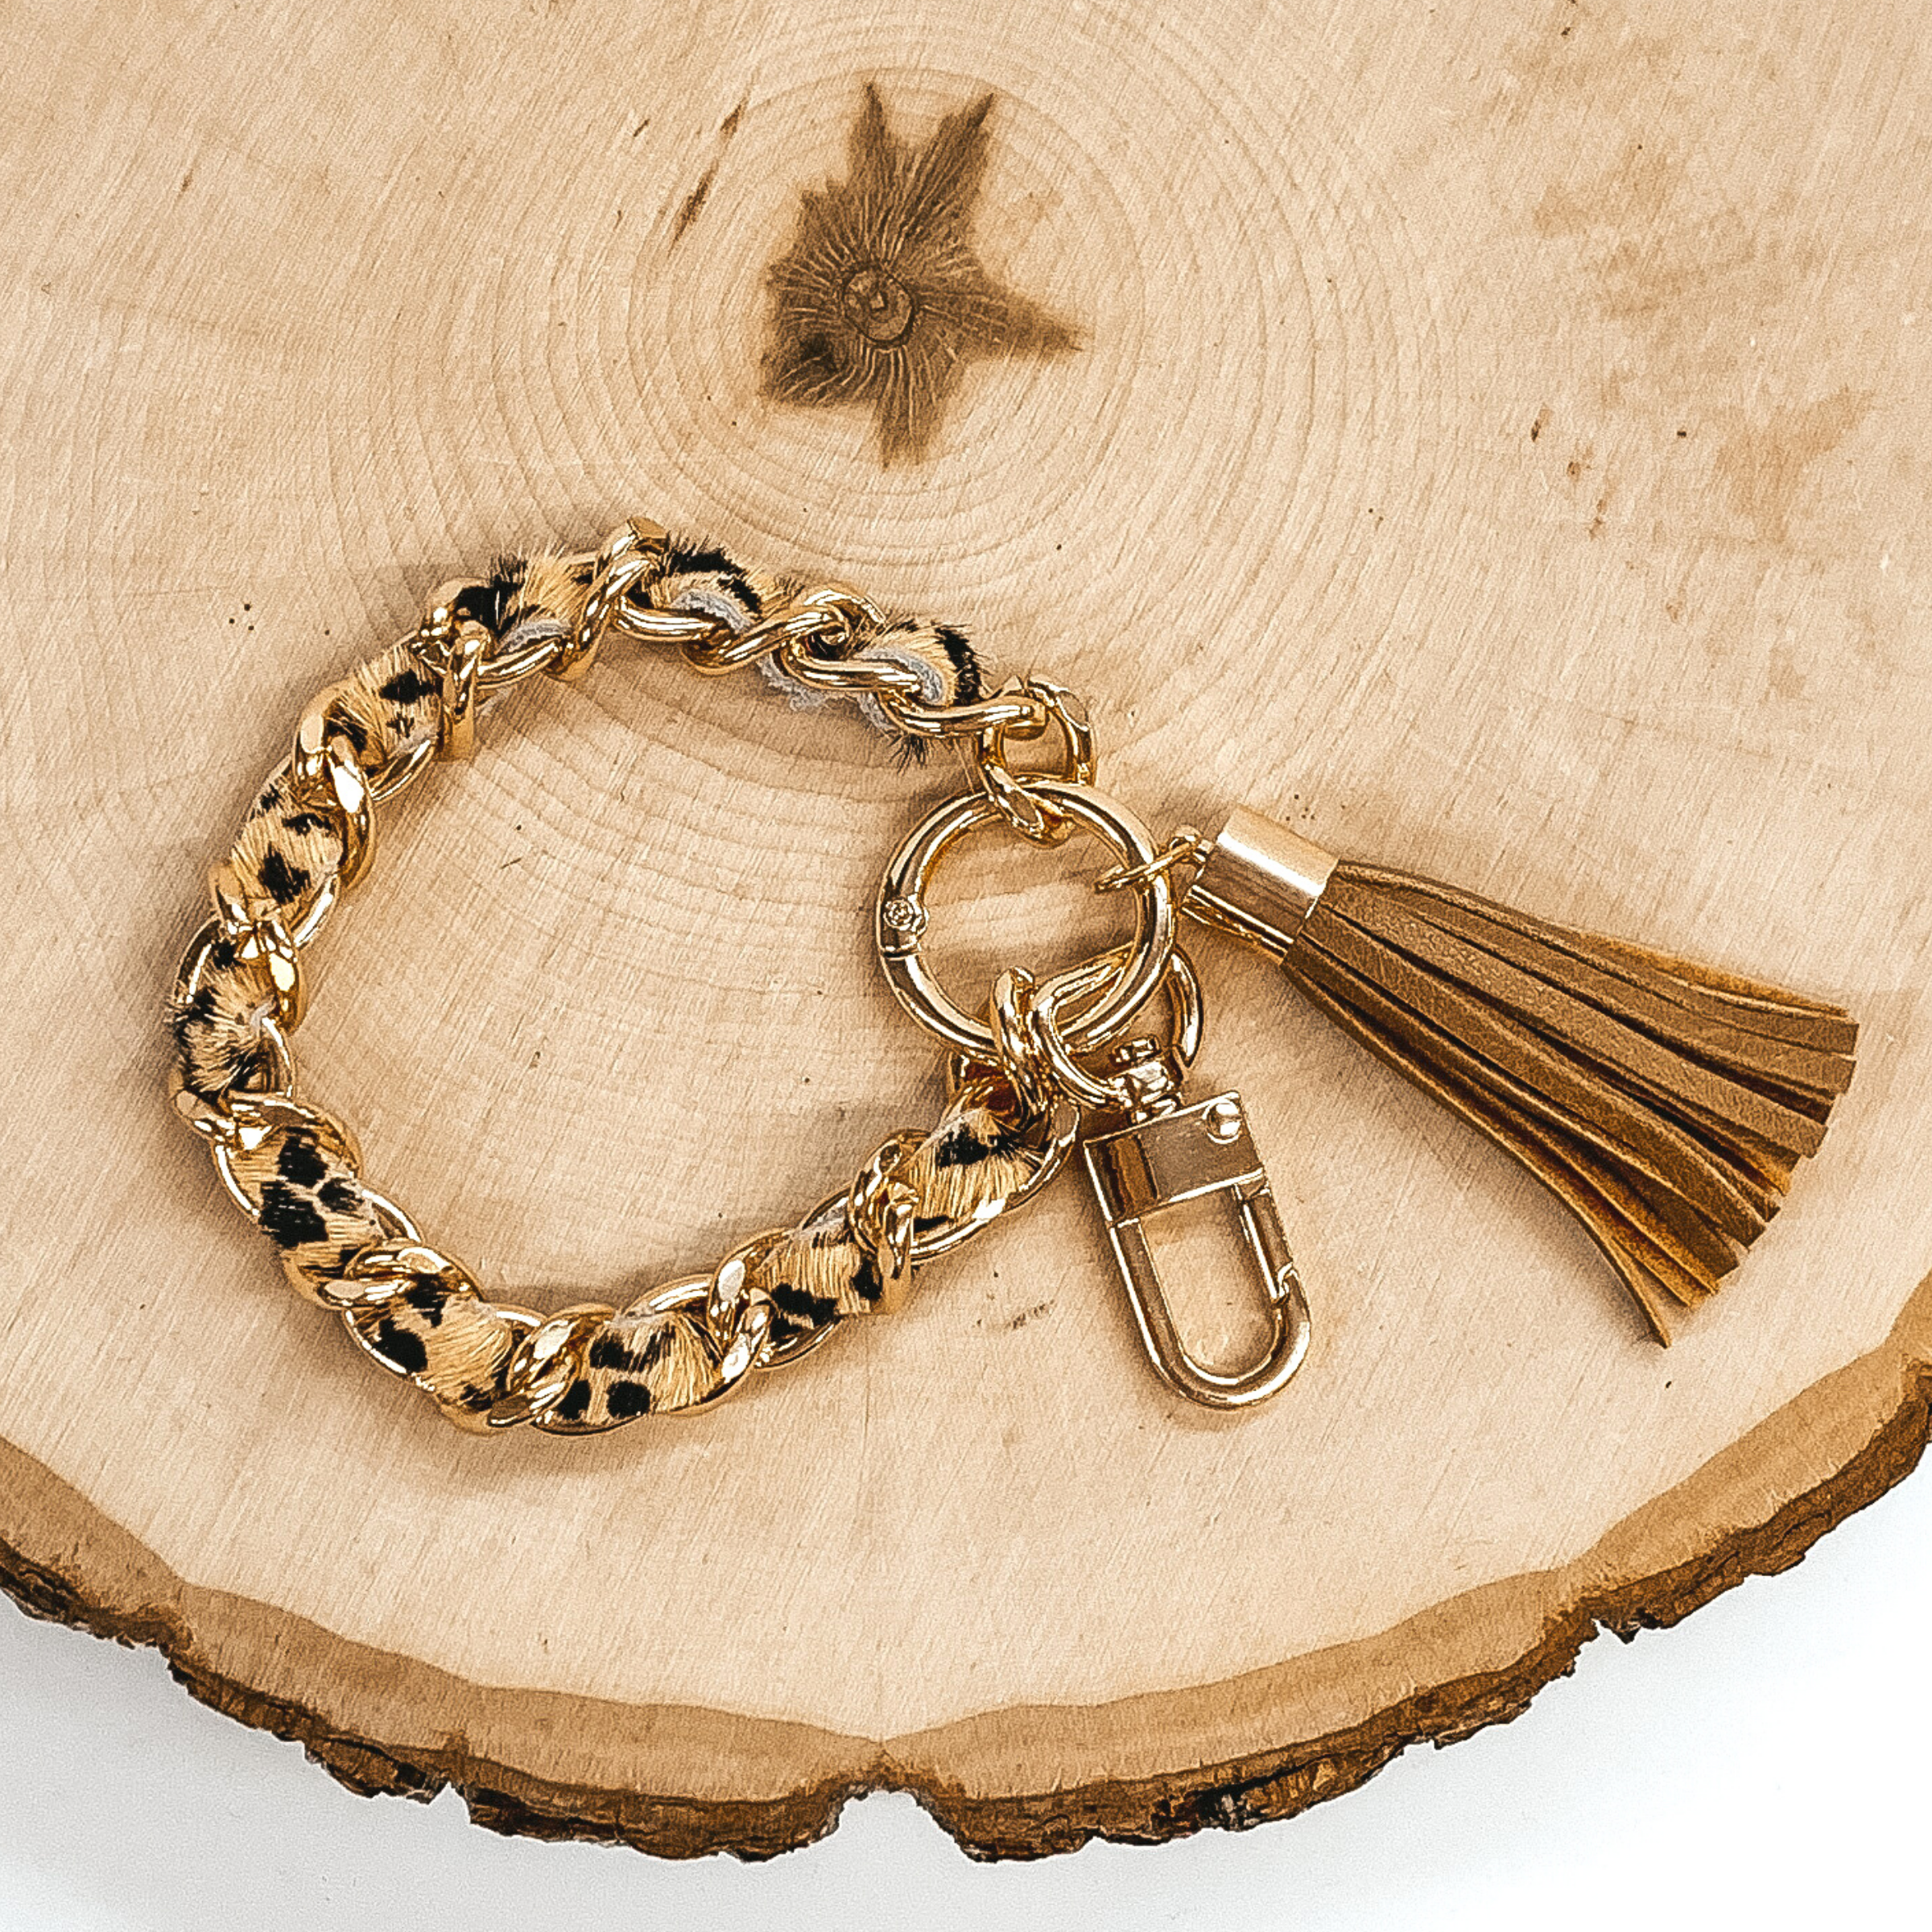 Gold chain link bangle with a cowhide like material running through the link. The material is a black and tan color. This bangle has two key chains and a tan tassel. It is pictured on a piece of wood on a white background.